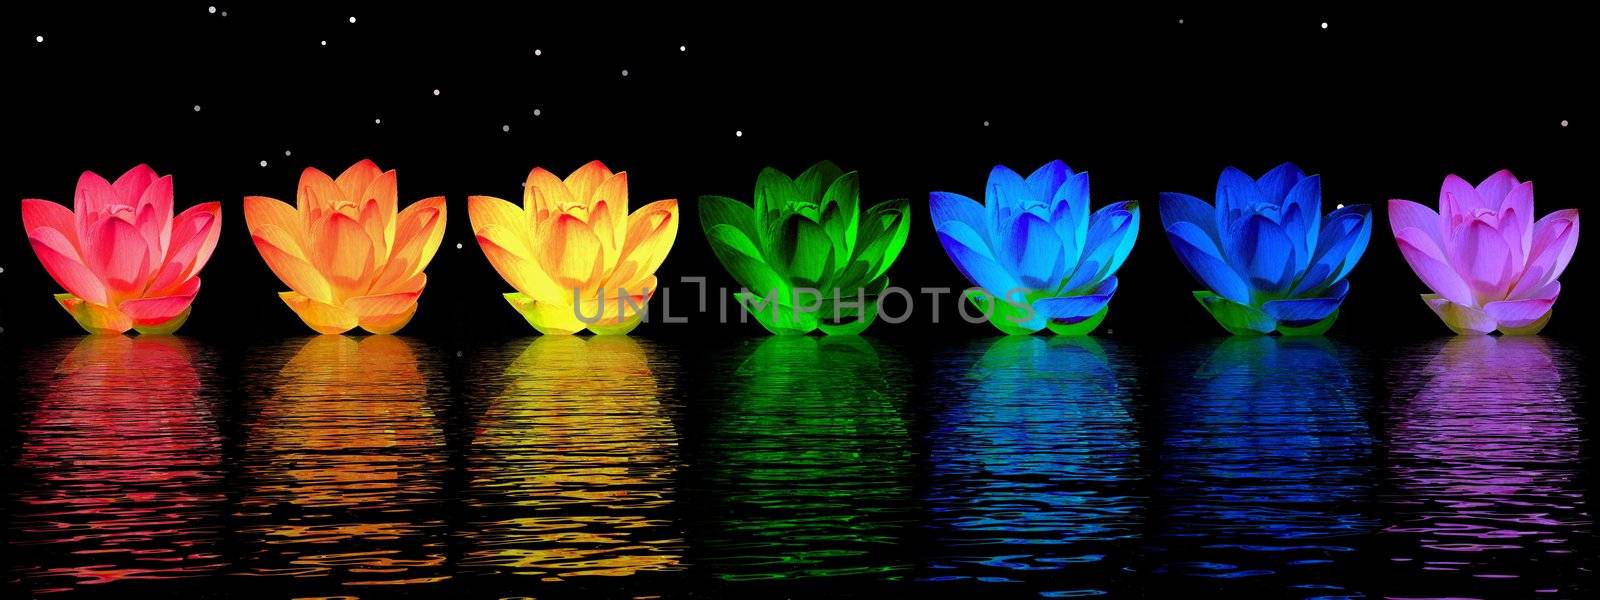 Chakra colors of lily flower upon water in night background